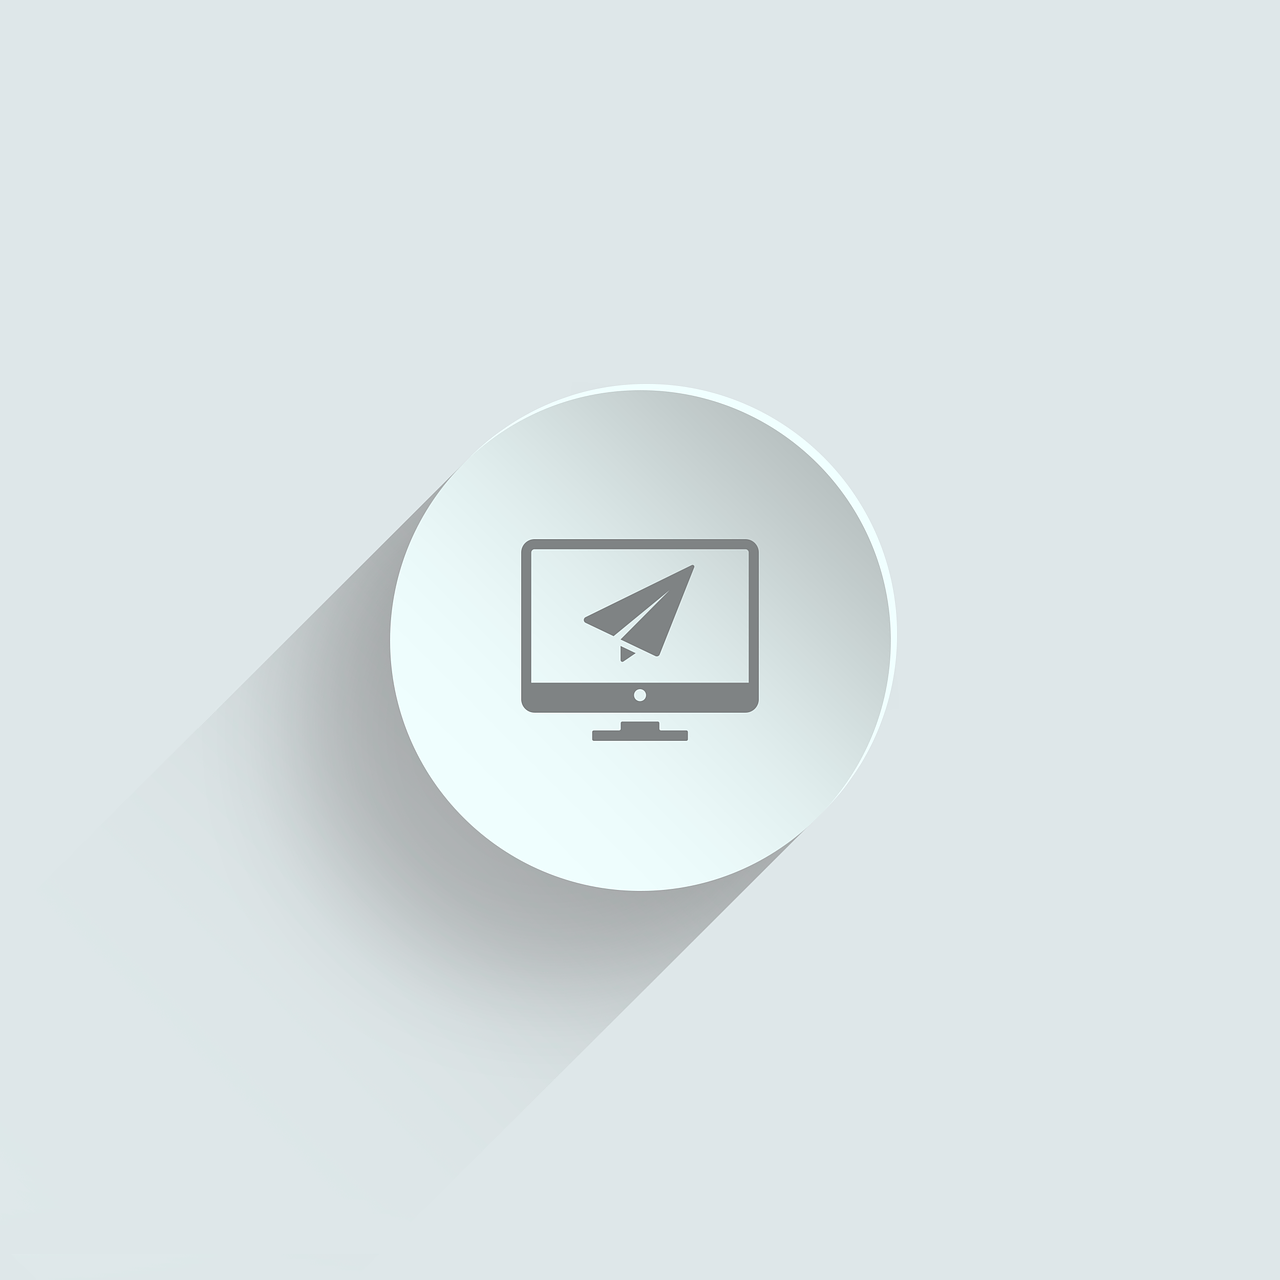 The landing page icon on a white background